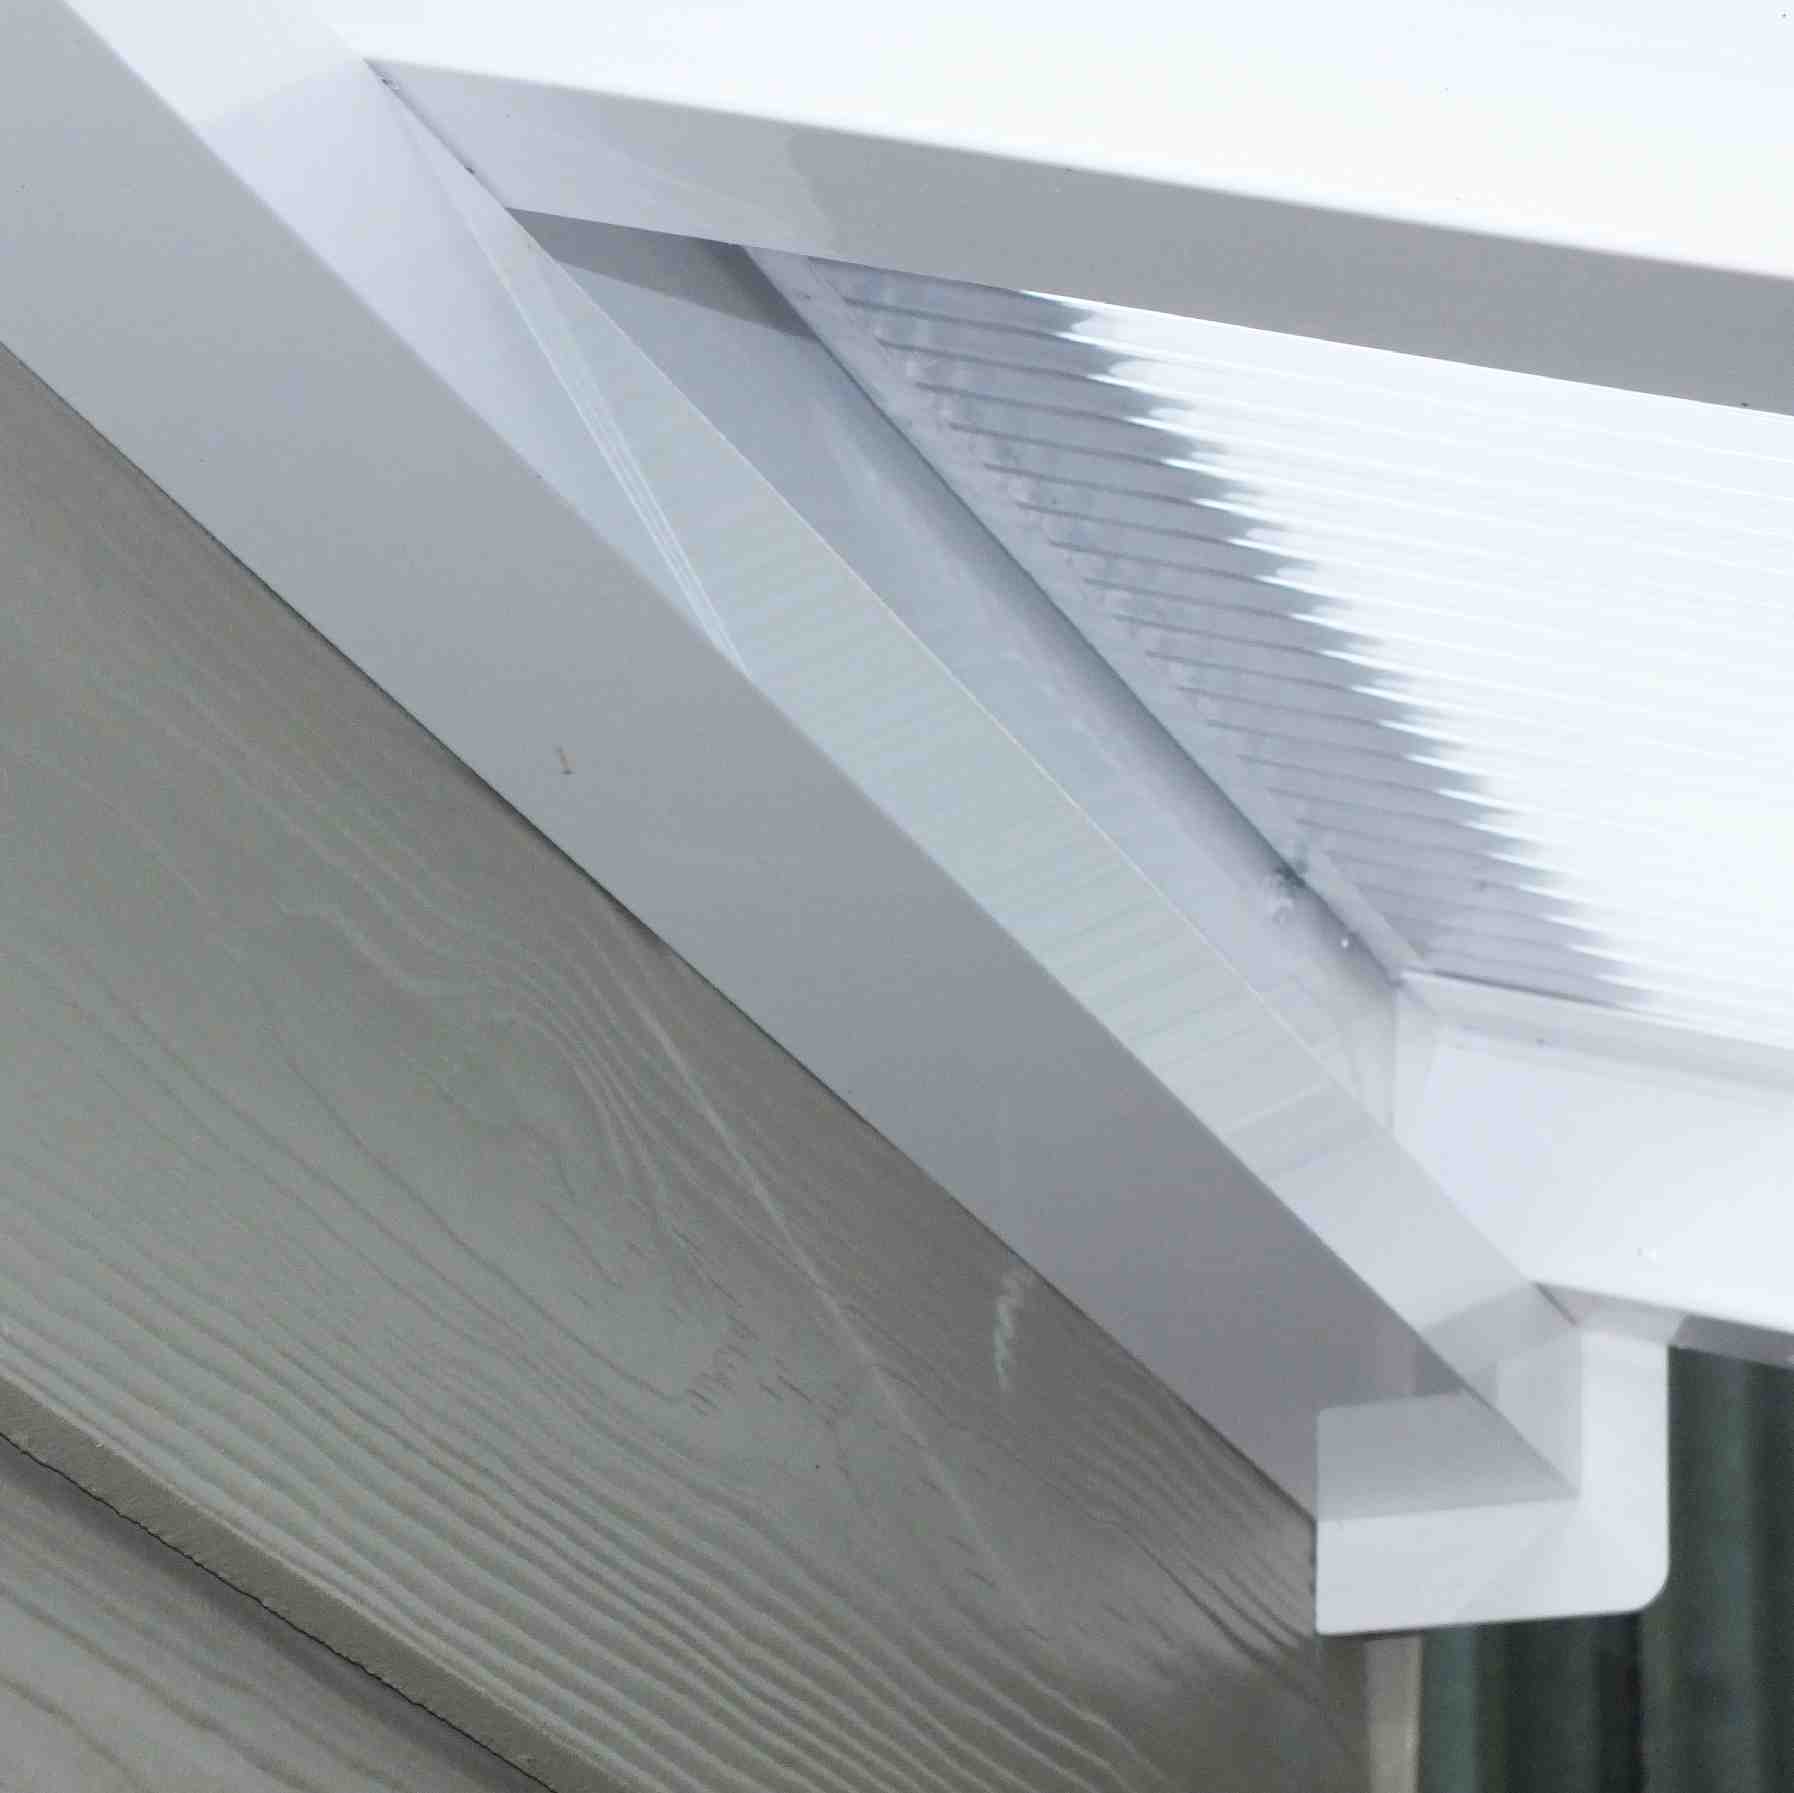 Great deals on Omega Verandah White with 16mm Polycarbonate Glazing - 8.4m (W) x 4.0m (P), (4) Supporting Posts